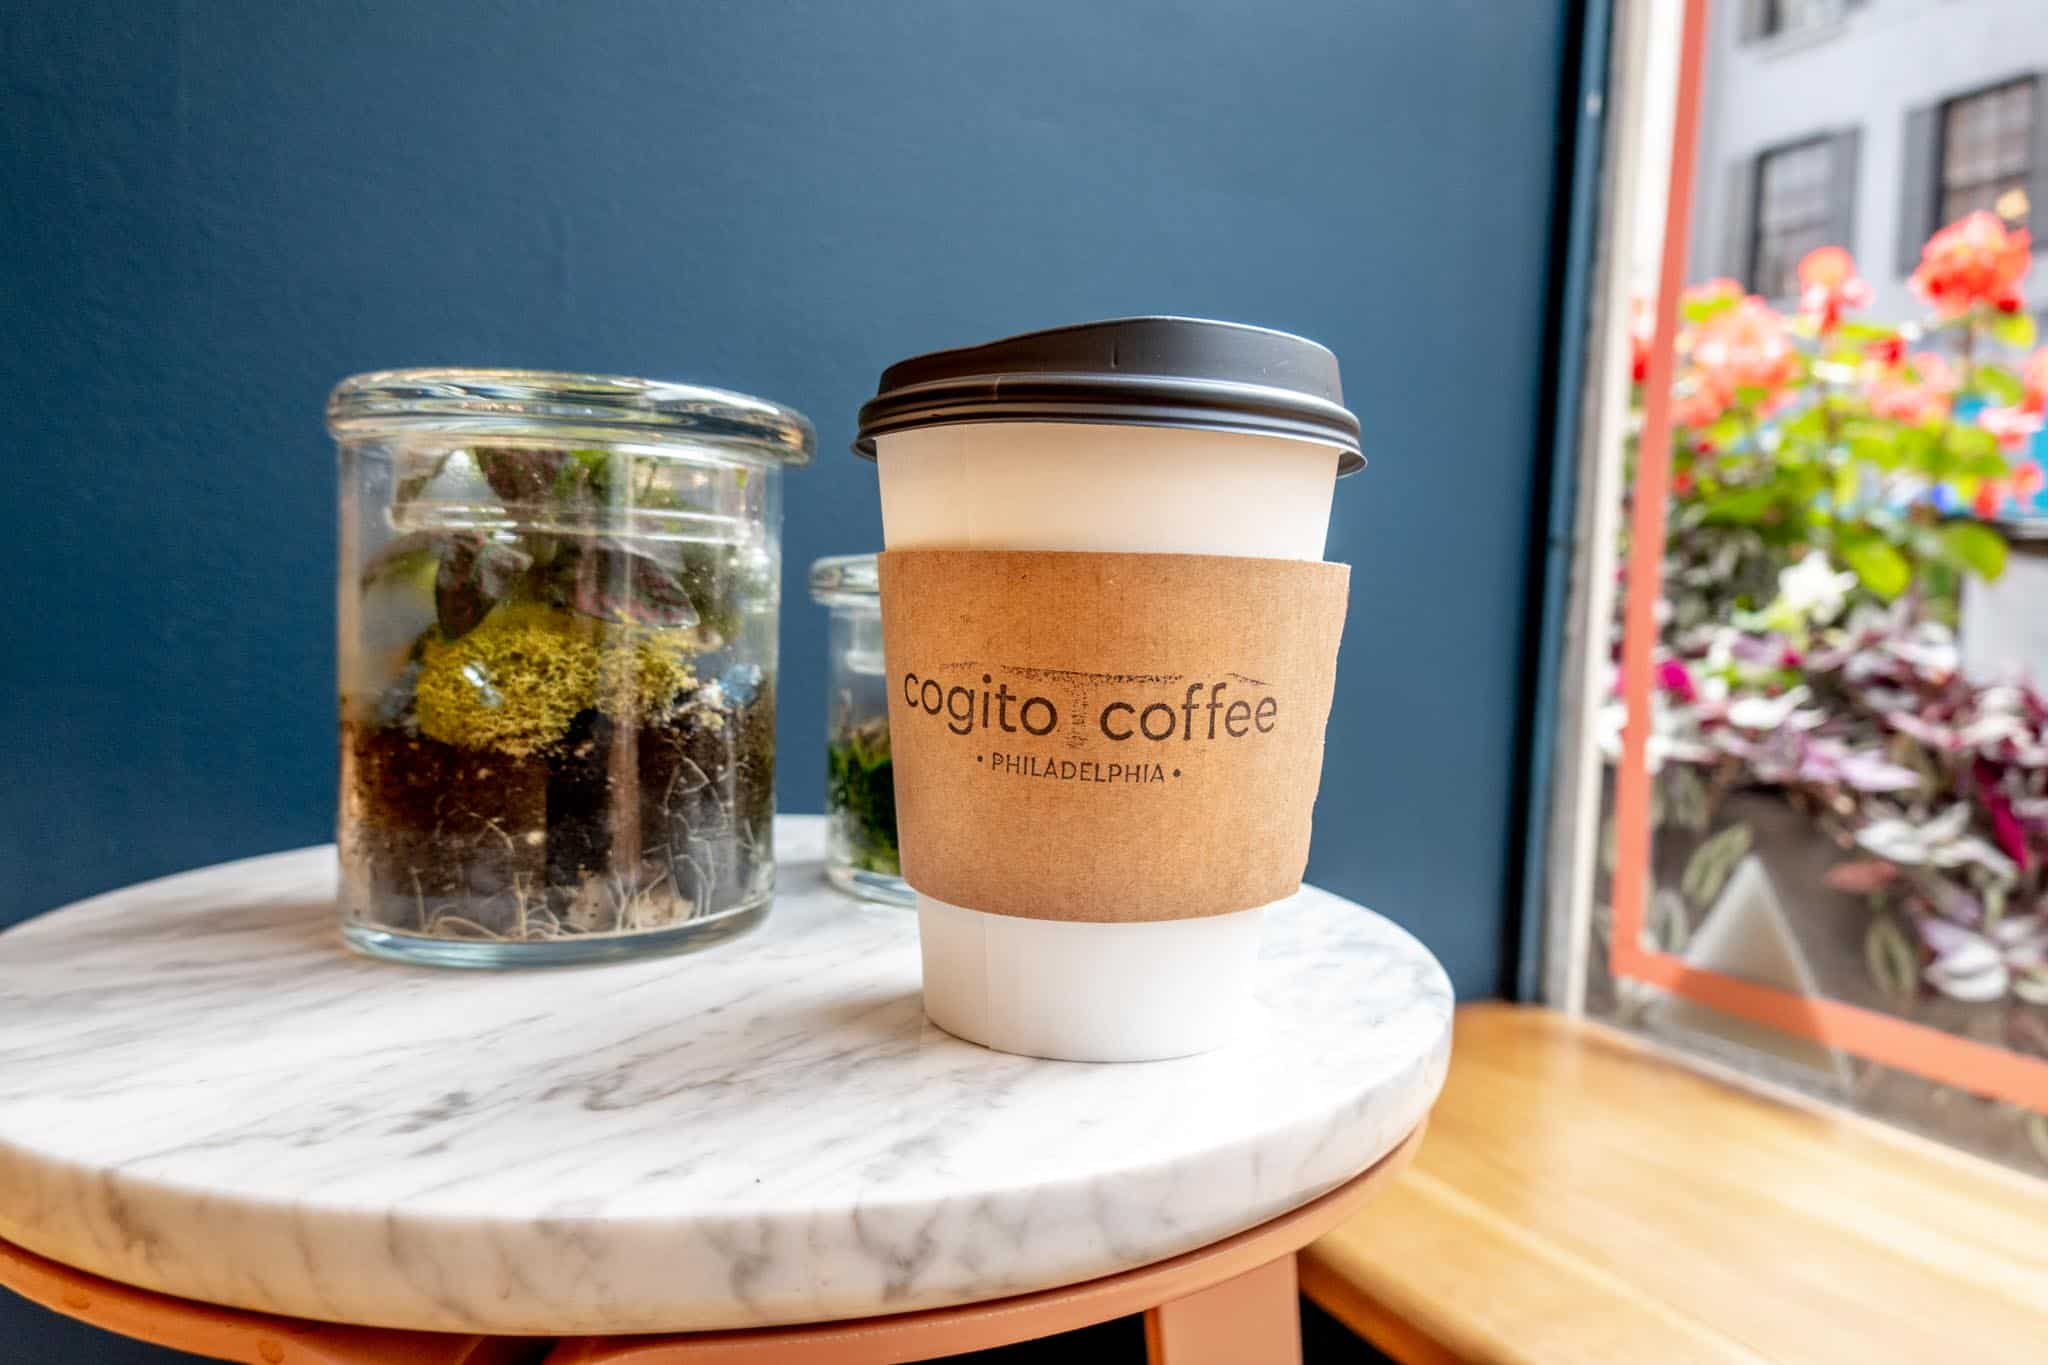 Cup labeled "Cogito Coffee, Philadelphia" on a table